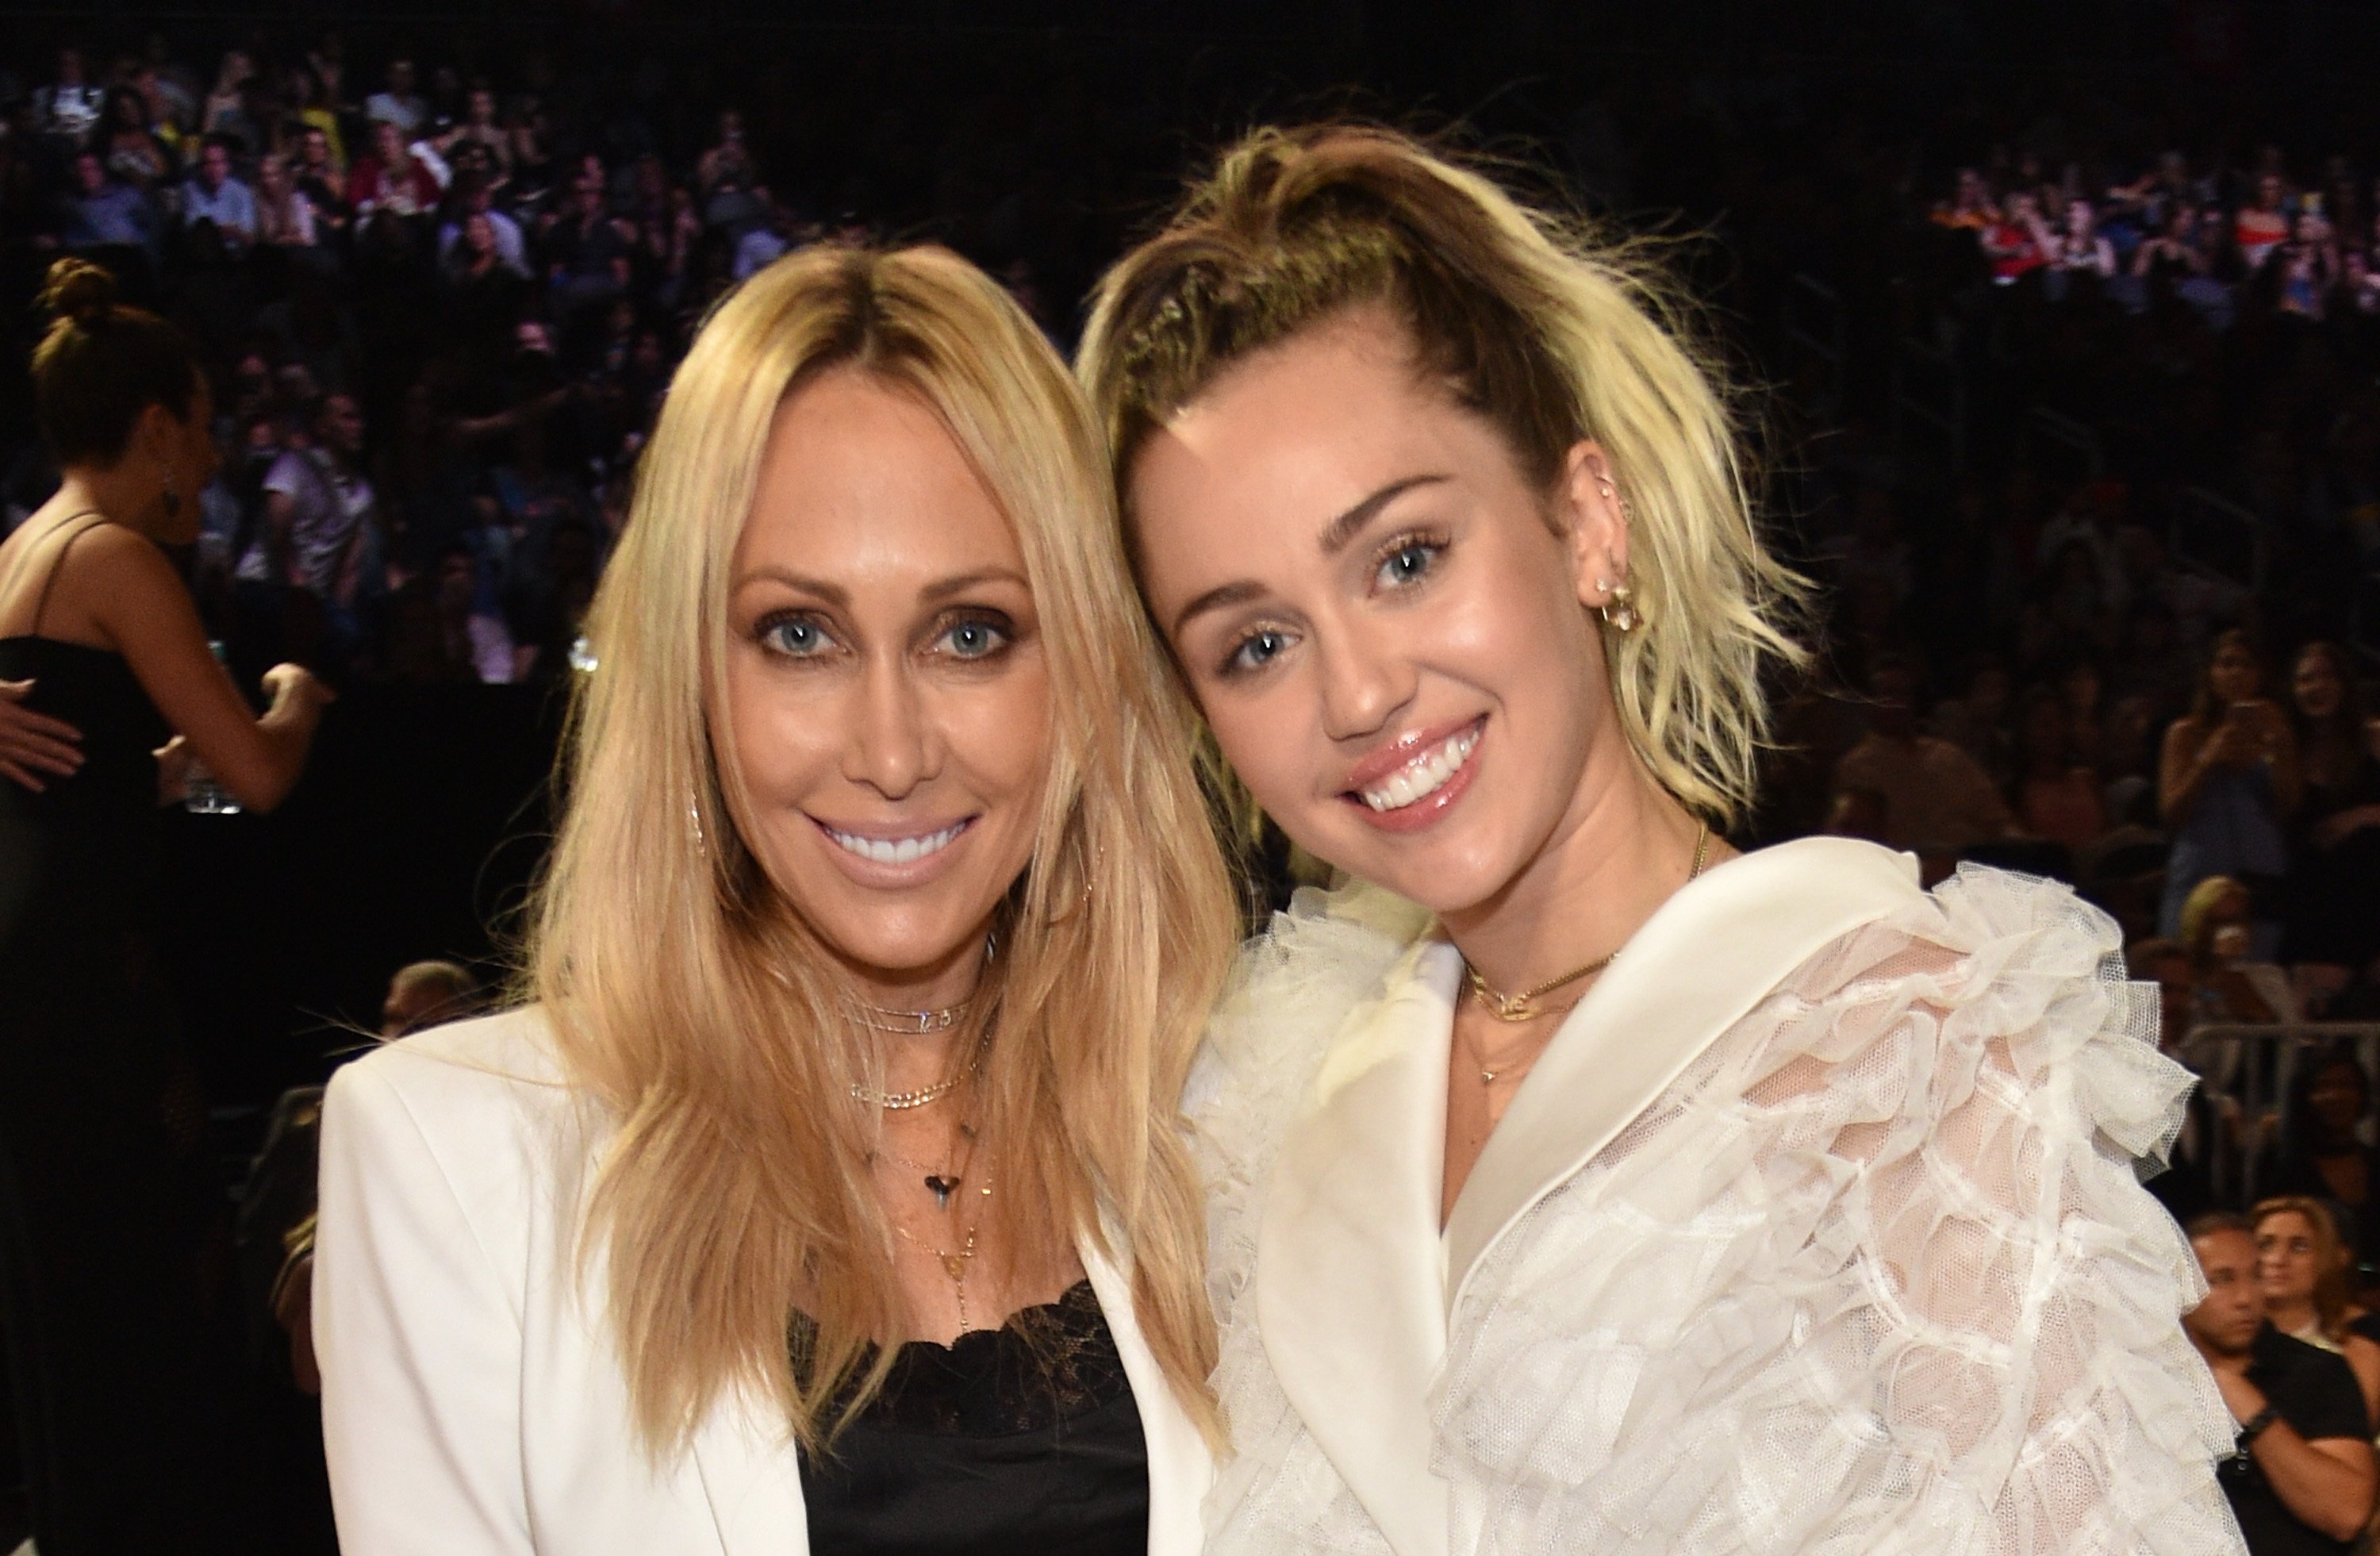 Tish and Miley Cyrus in front of a crowd